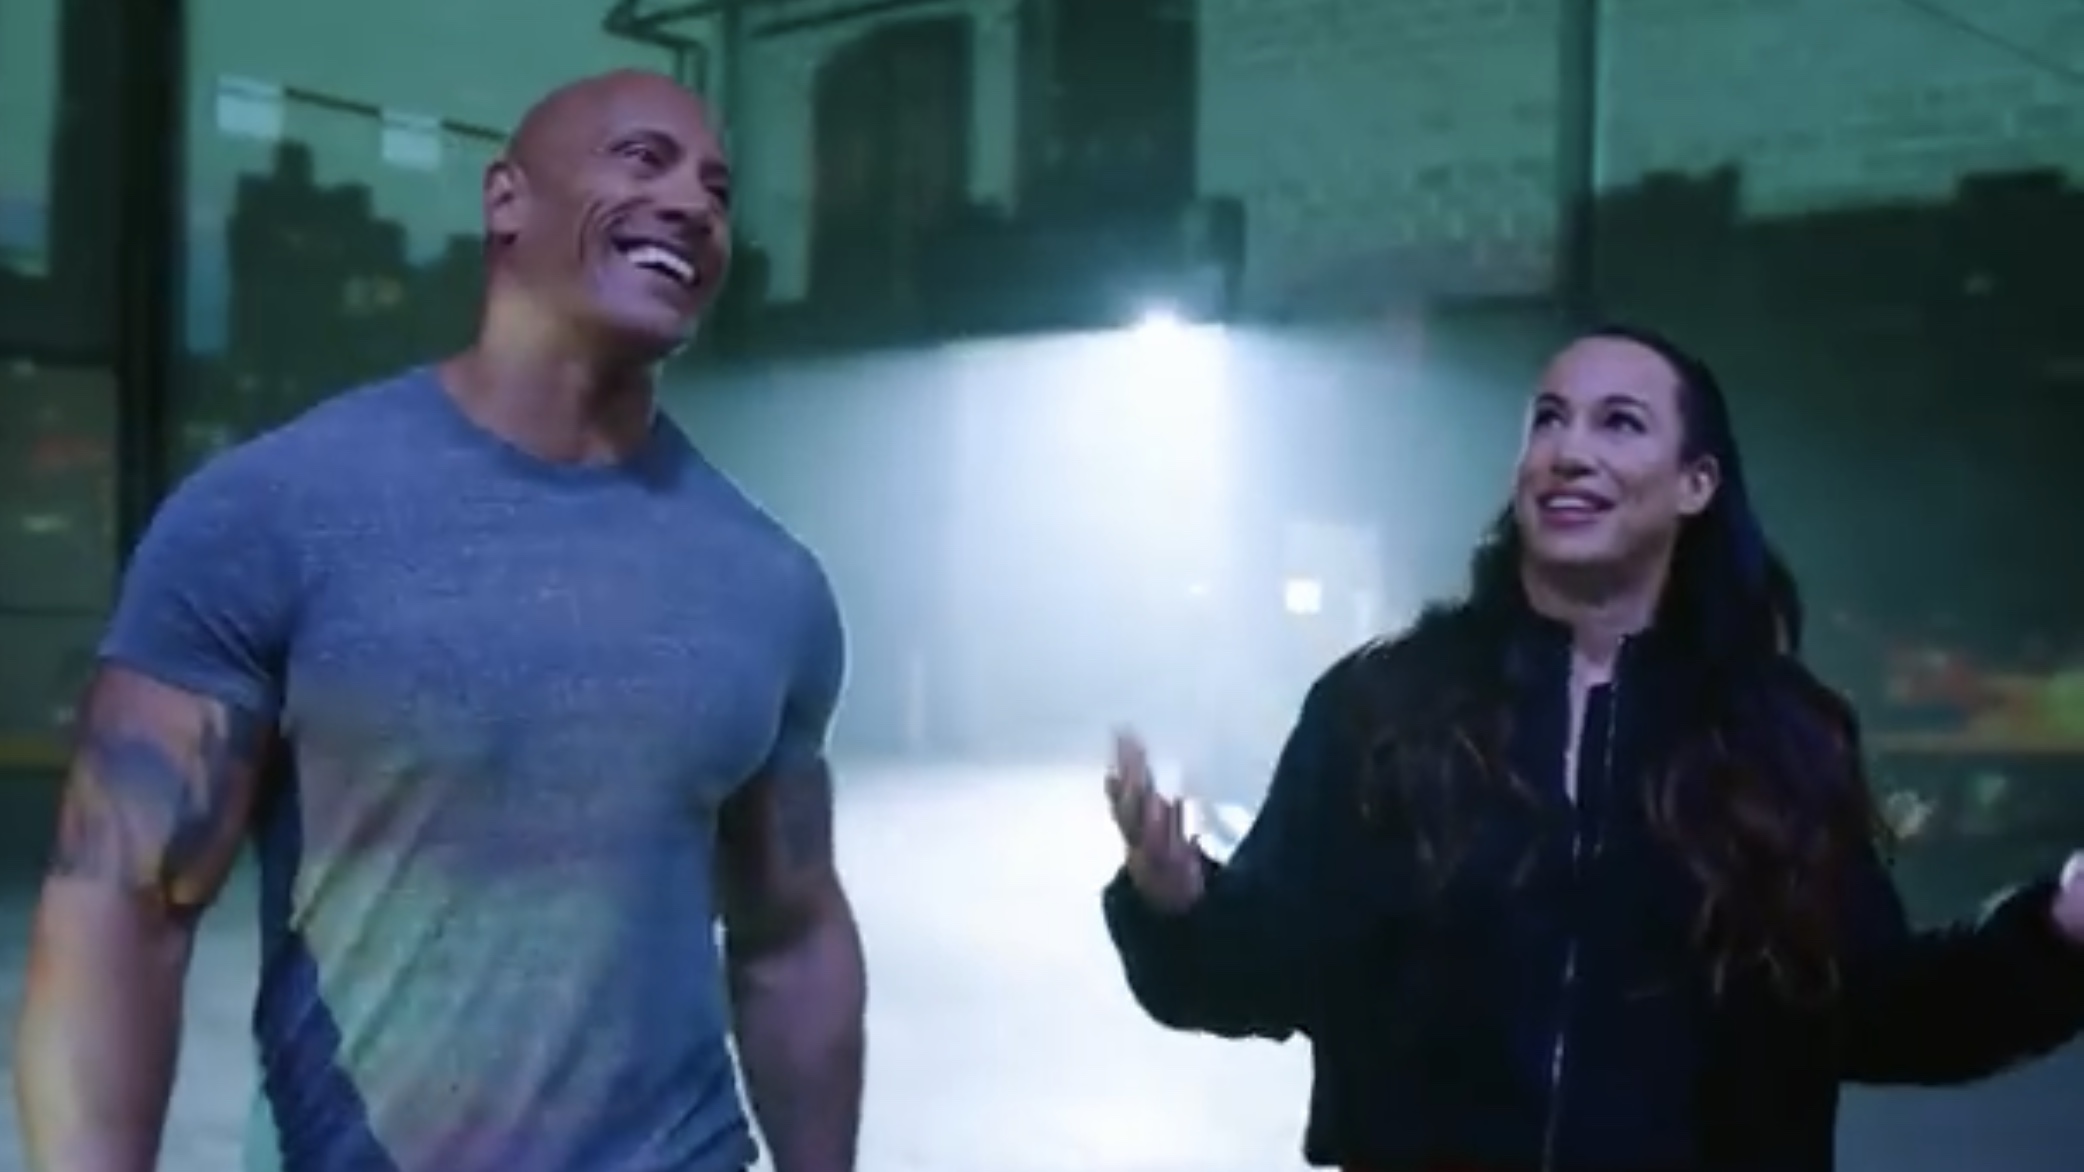 Dwayne Johnson And Dany Garcia Prepare To Launch Athleticon Fitness Event